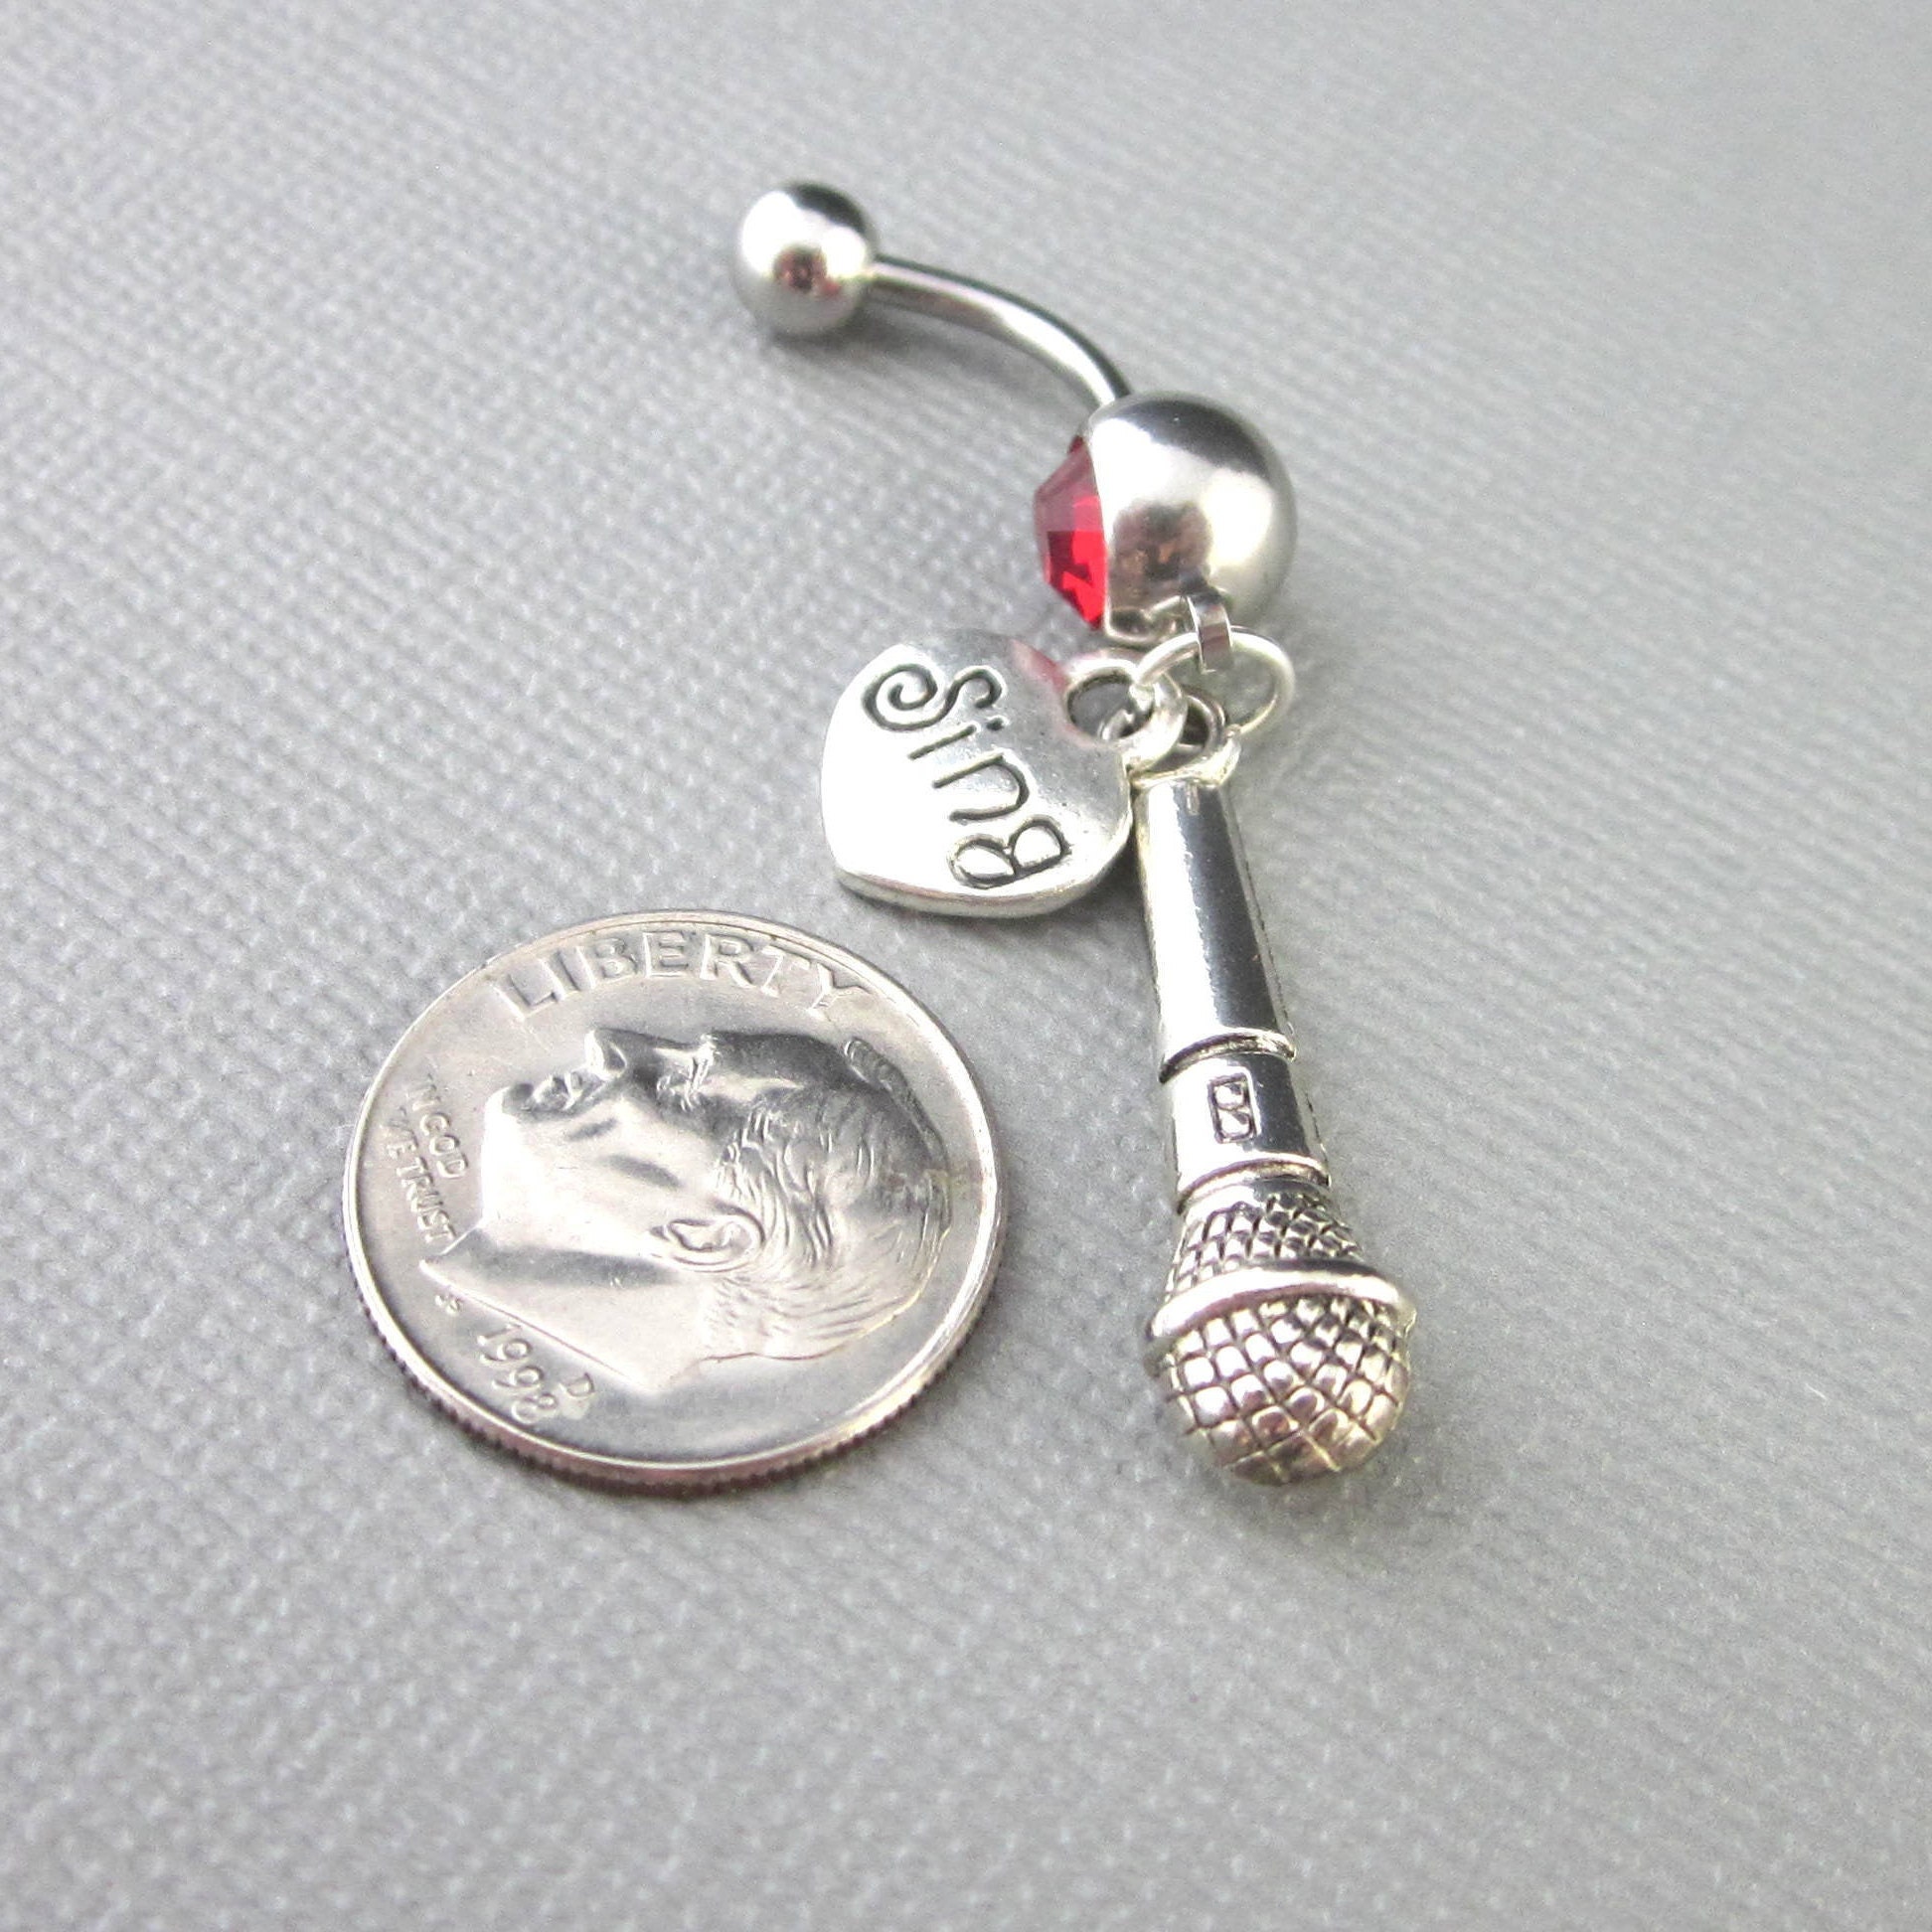 Microphone MIC Drop Voice Belly Button Navel Ring Body Jewelry Piercing Singer #IS-718